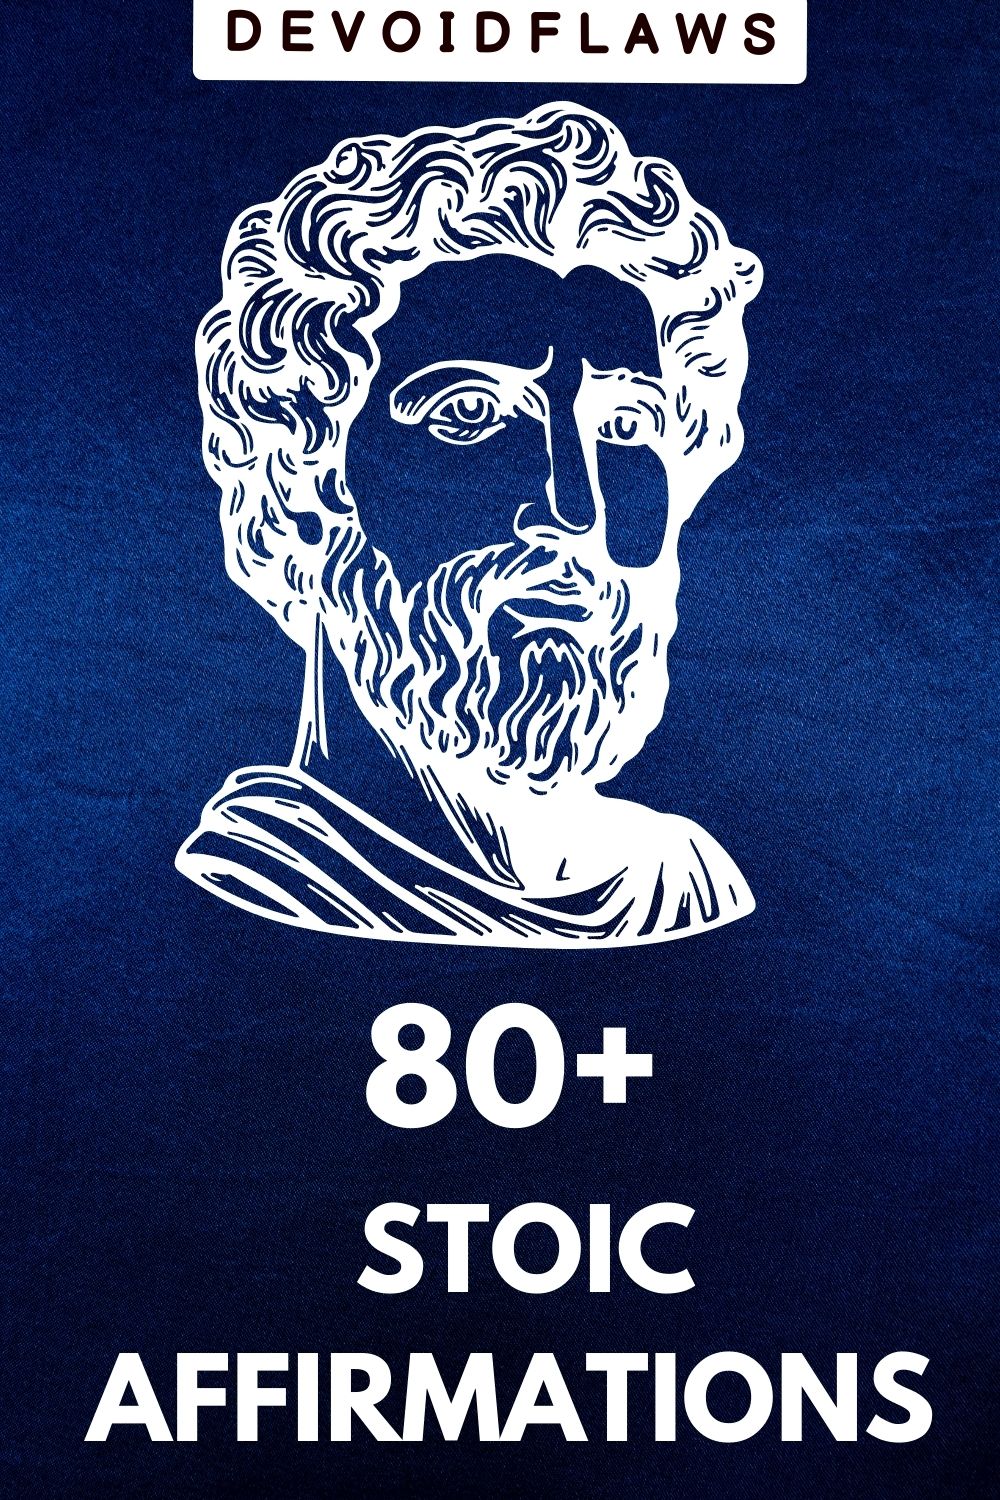 blue text image with text - 80+ stoic affirmations